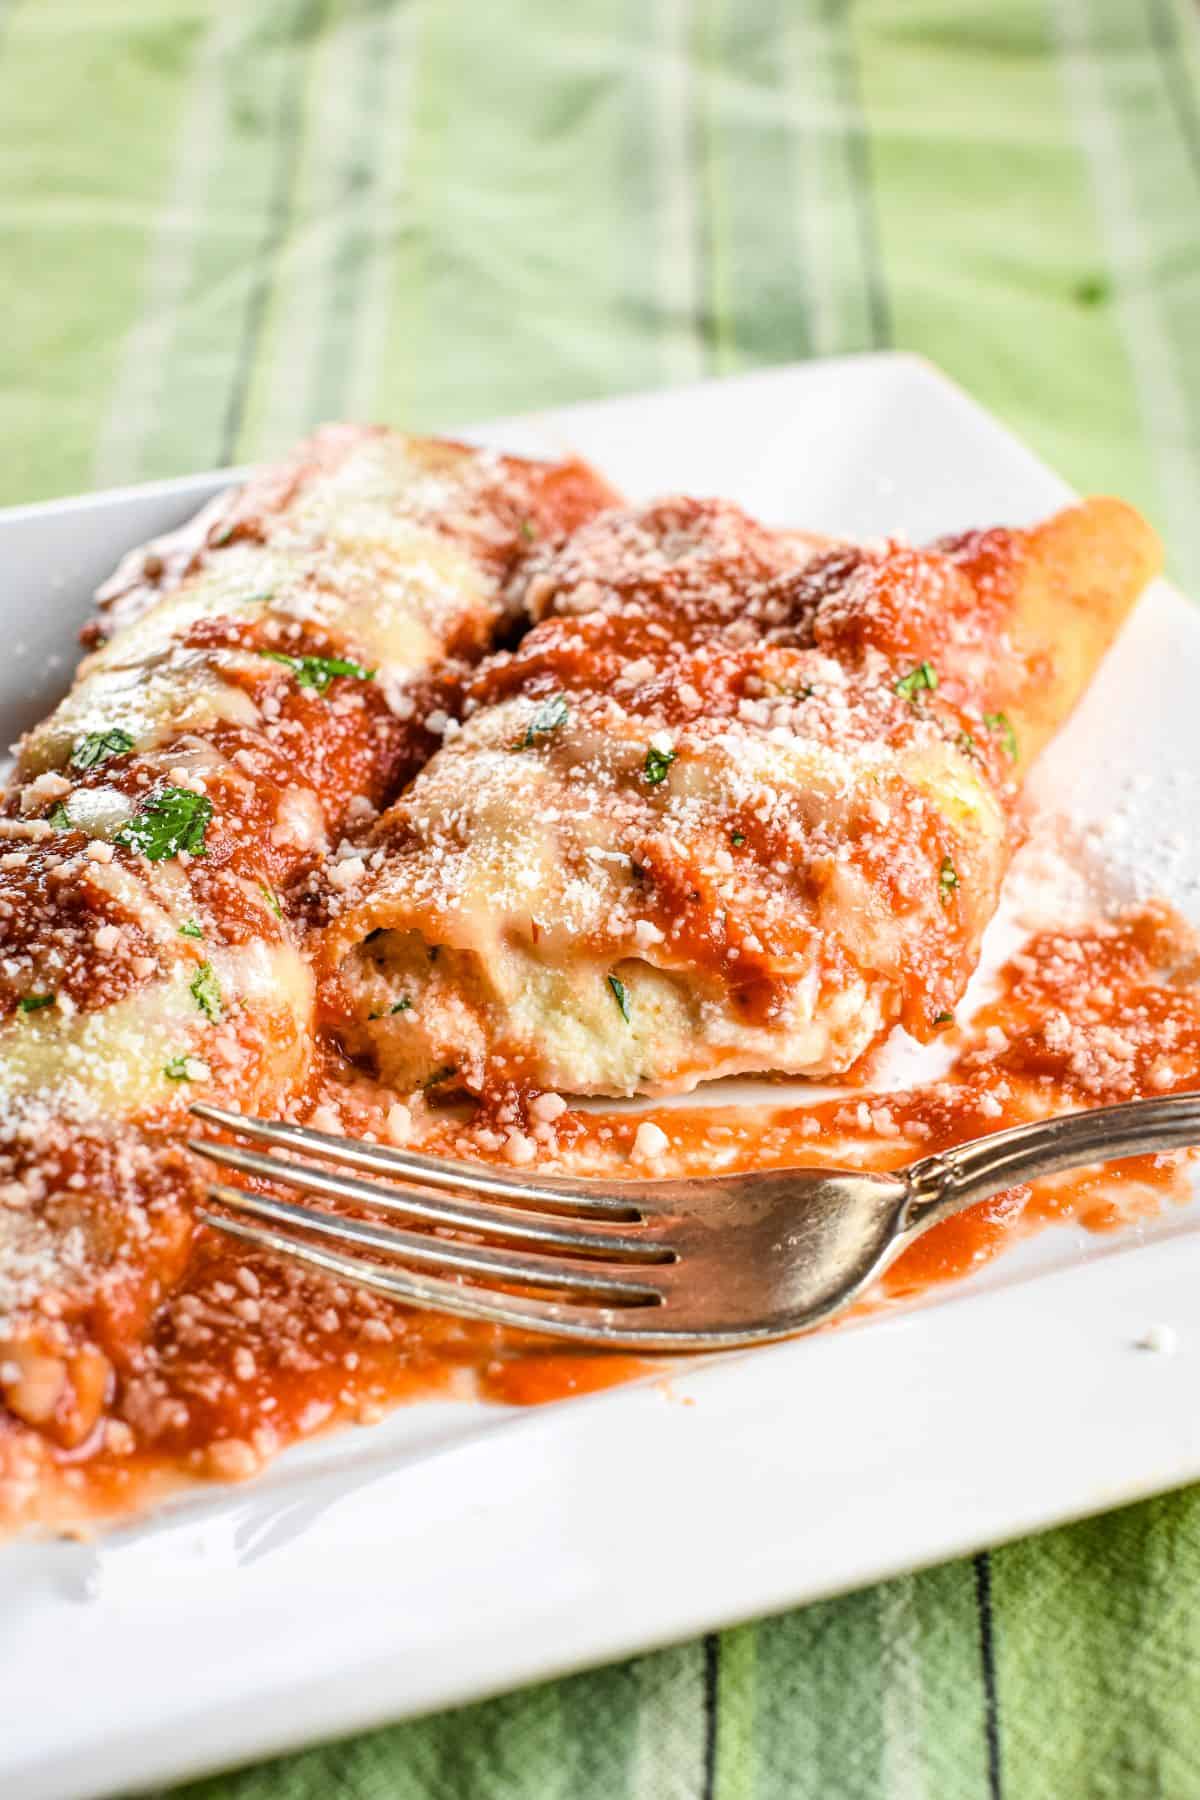 homemade manicotti on a white plate with a fork on it.